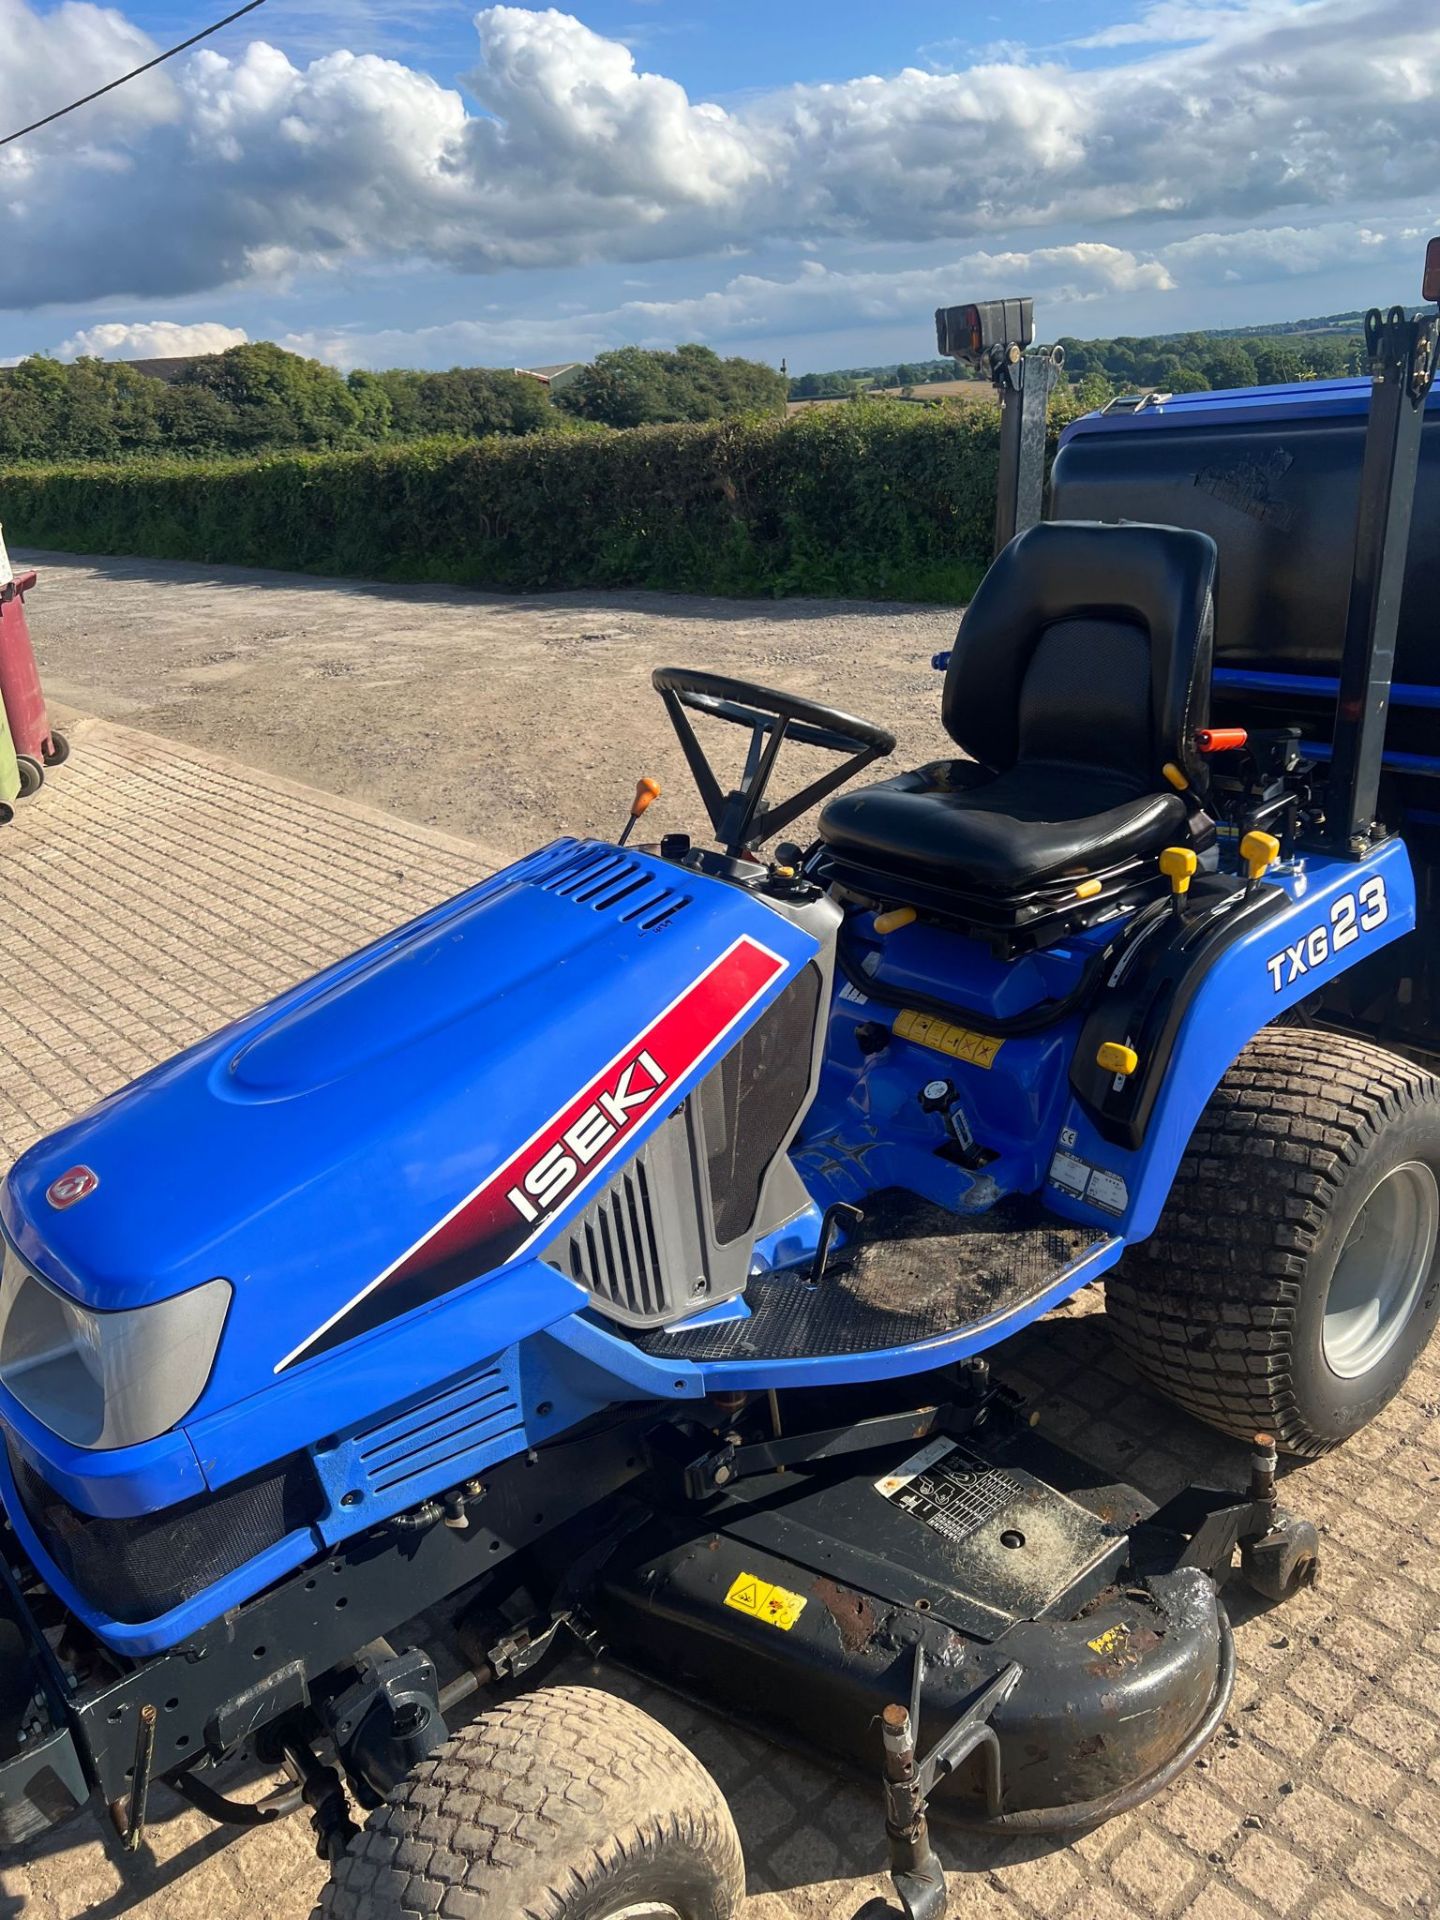 ISEKI TXG 23 RIDE ON LAWN MOWER AND COLLECTOR! *PLUS VAT* - Image 10 of 11